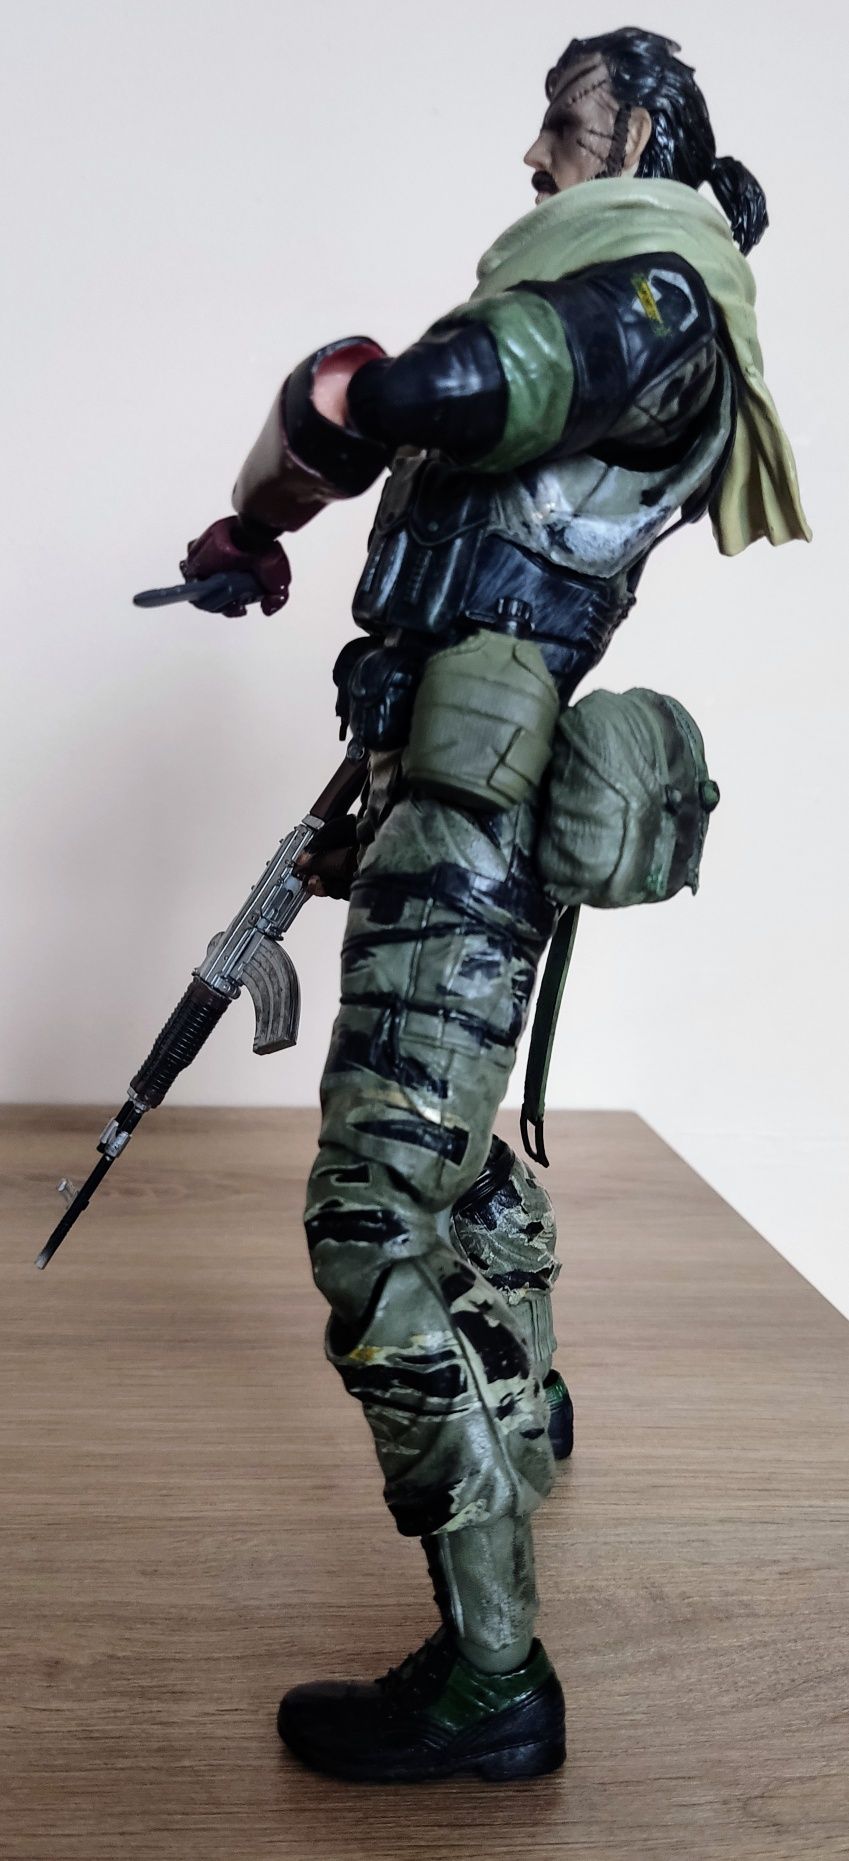 Metal Gear Solid Snake jak Play Arts Kai figurka PS4 PS3 Xbox One PC.